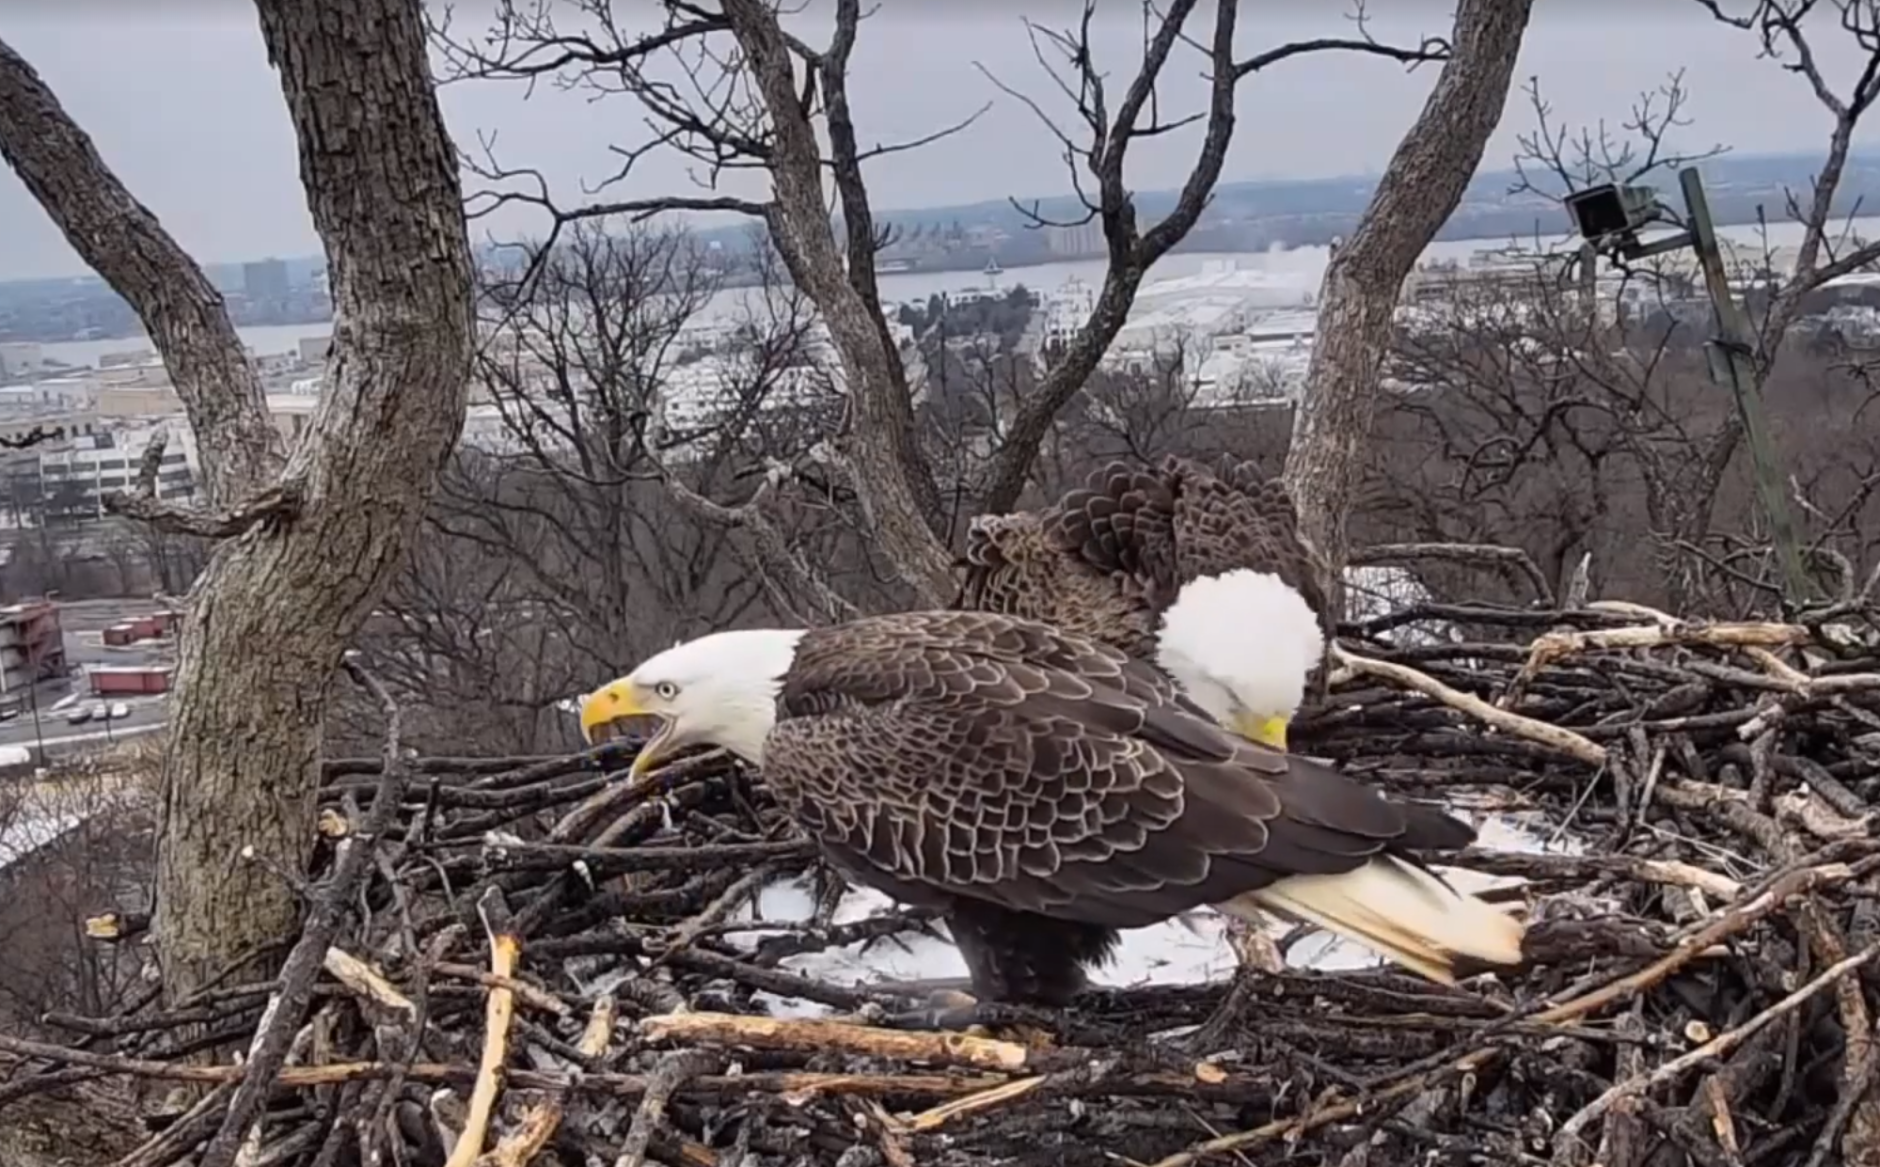 Justice (left) yells at traffic while Liberty chows down on a fish. (Courtesy Earth Conservation Corps via Facebook)